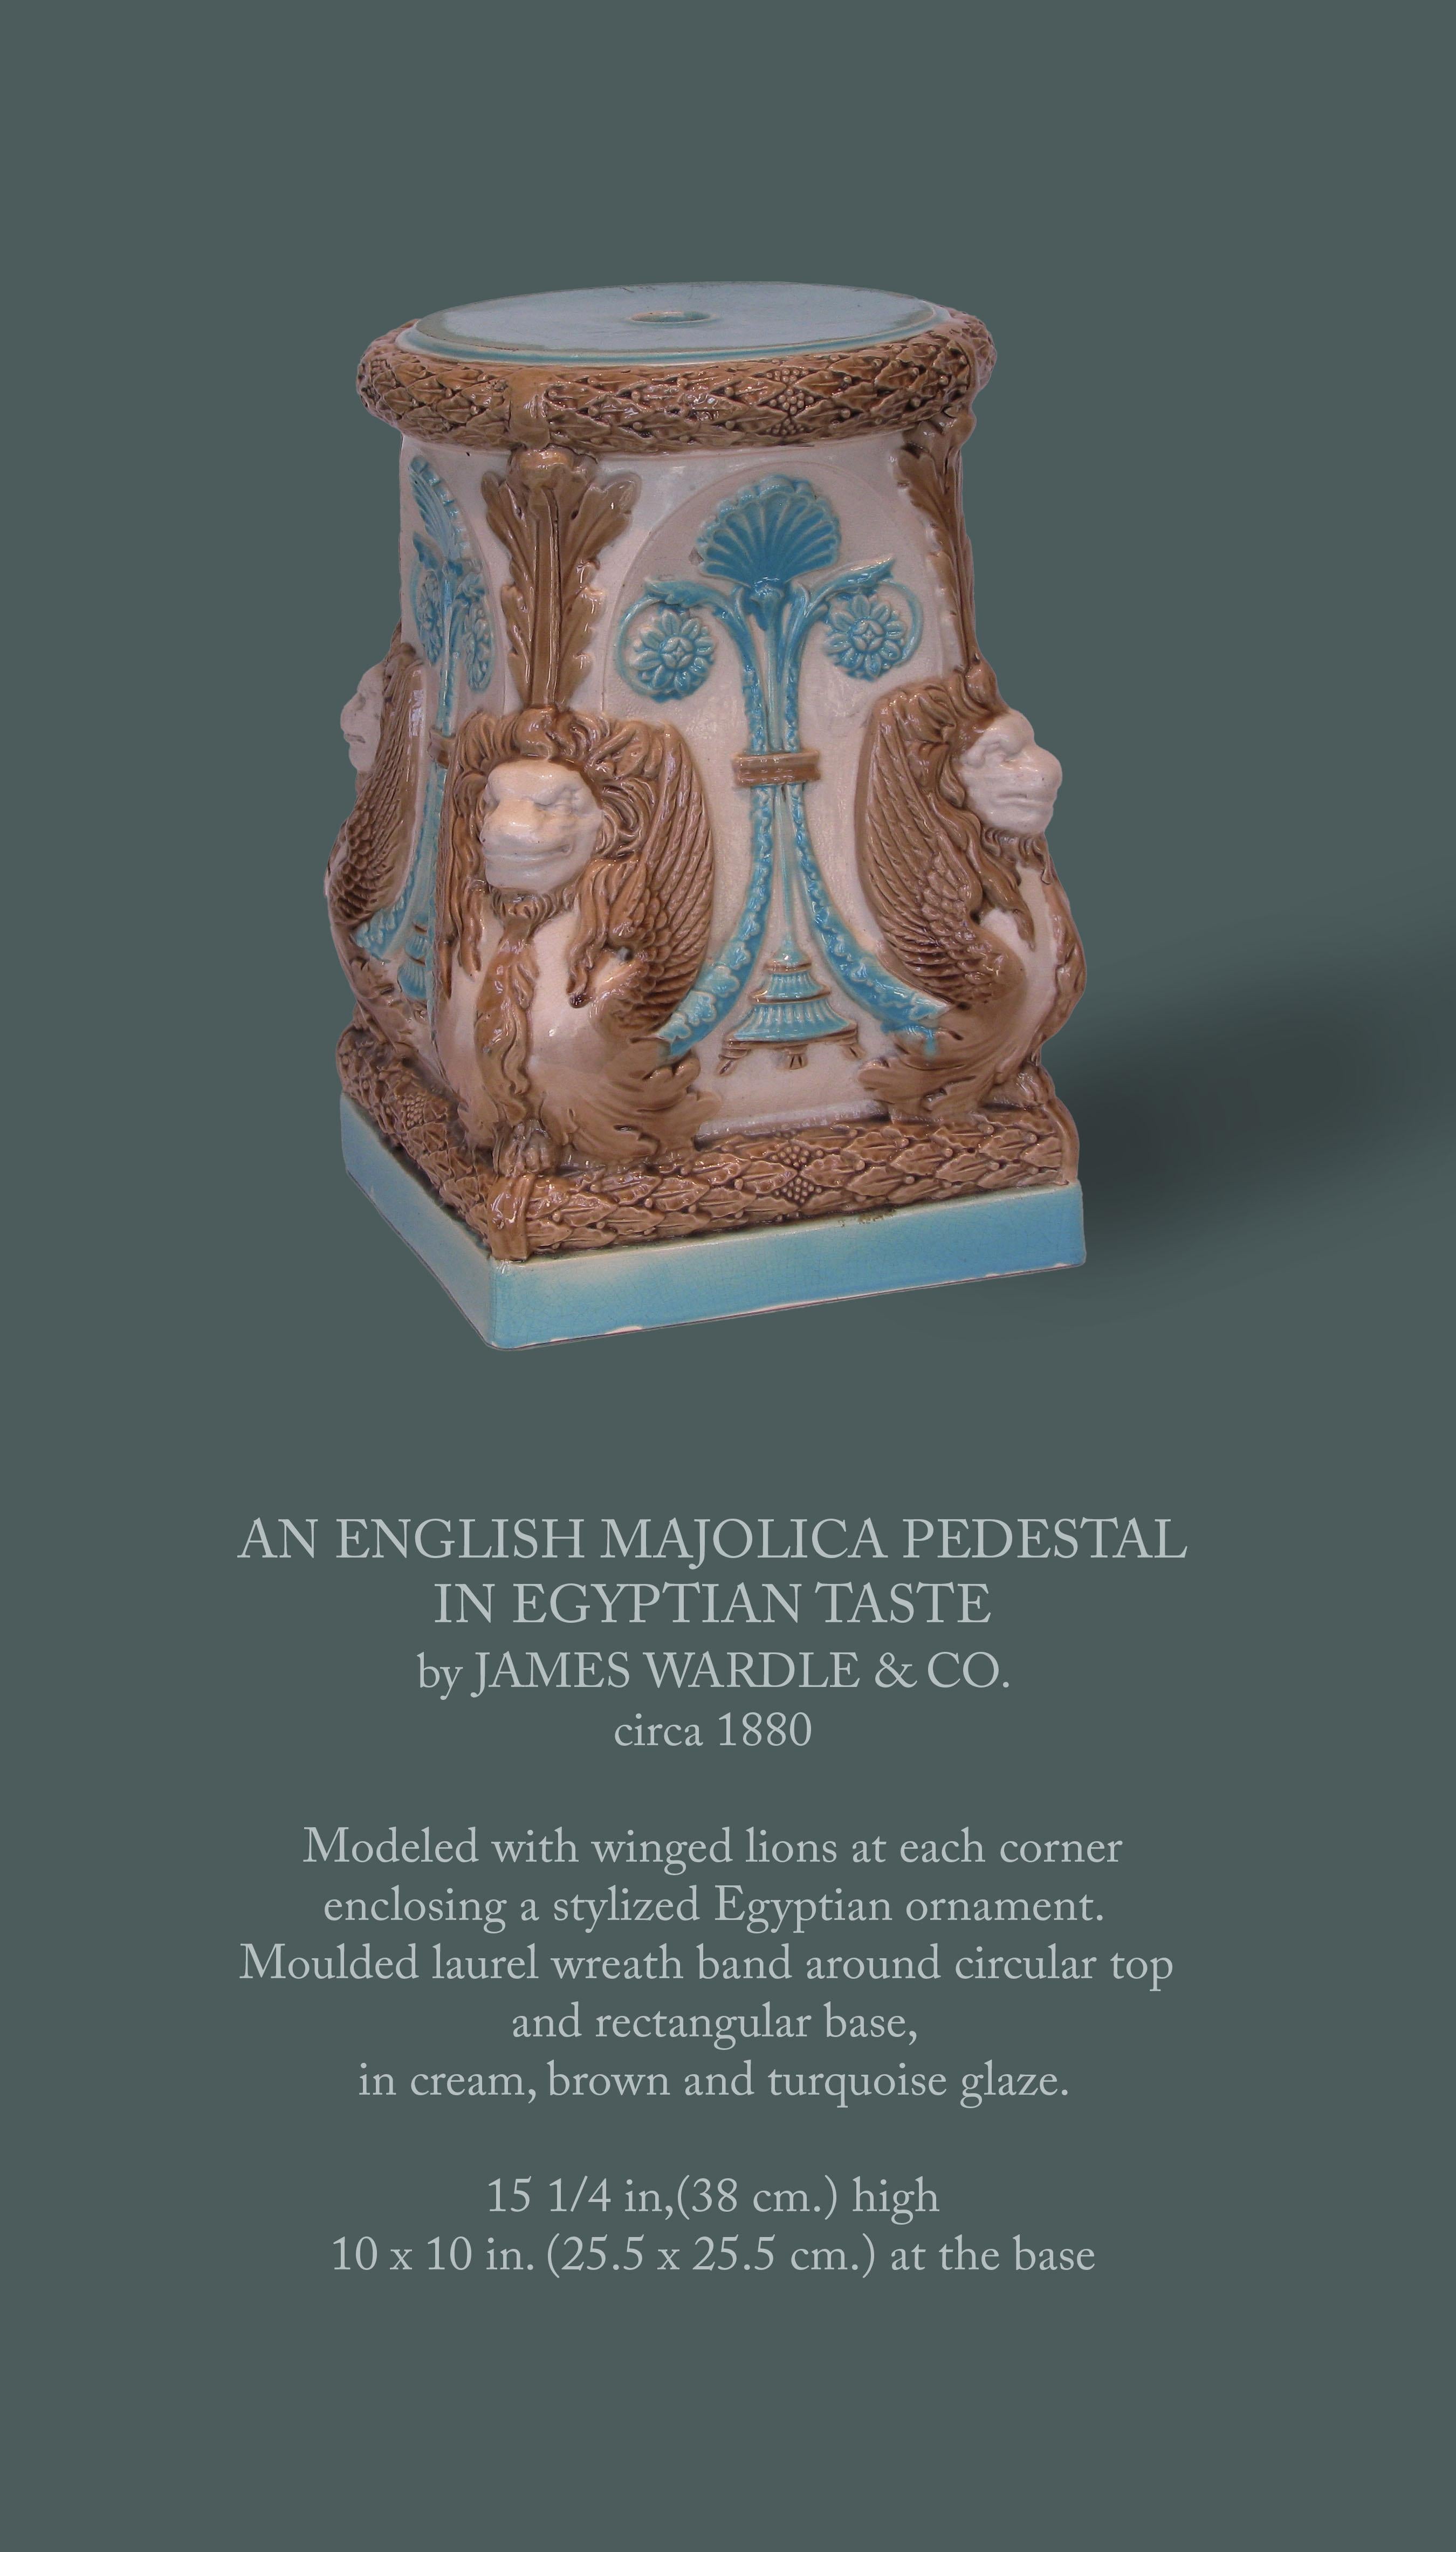 AN ENGLISH MAJOLICA PEDESTAL
IN EGYPTIAN TASTE
by JAMES WARDLE & CO.
Circa 1880

Modeled with winged lions at each corner
enclosing a stylized Egyptian ornament.
Moulded laurel wreath band around circular top and rectangular base,
in cream, brown